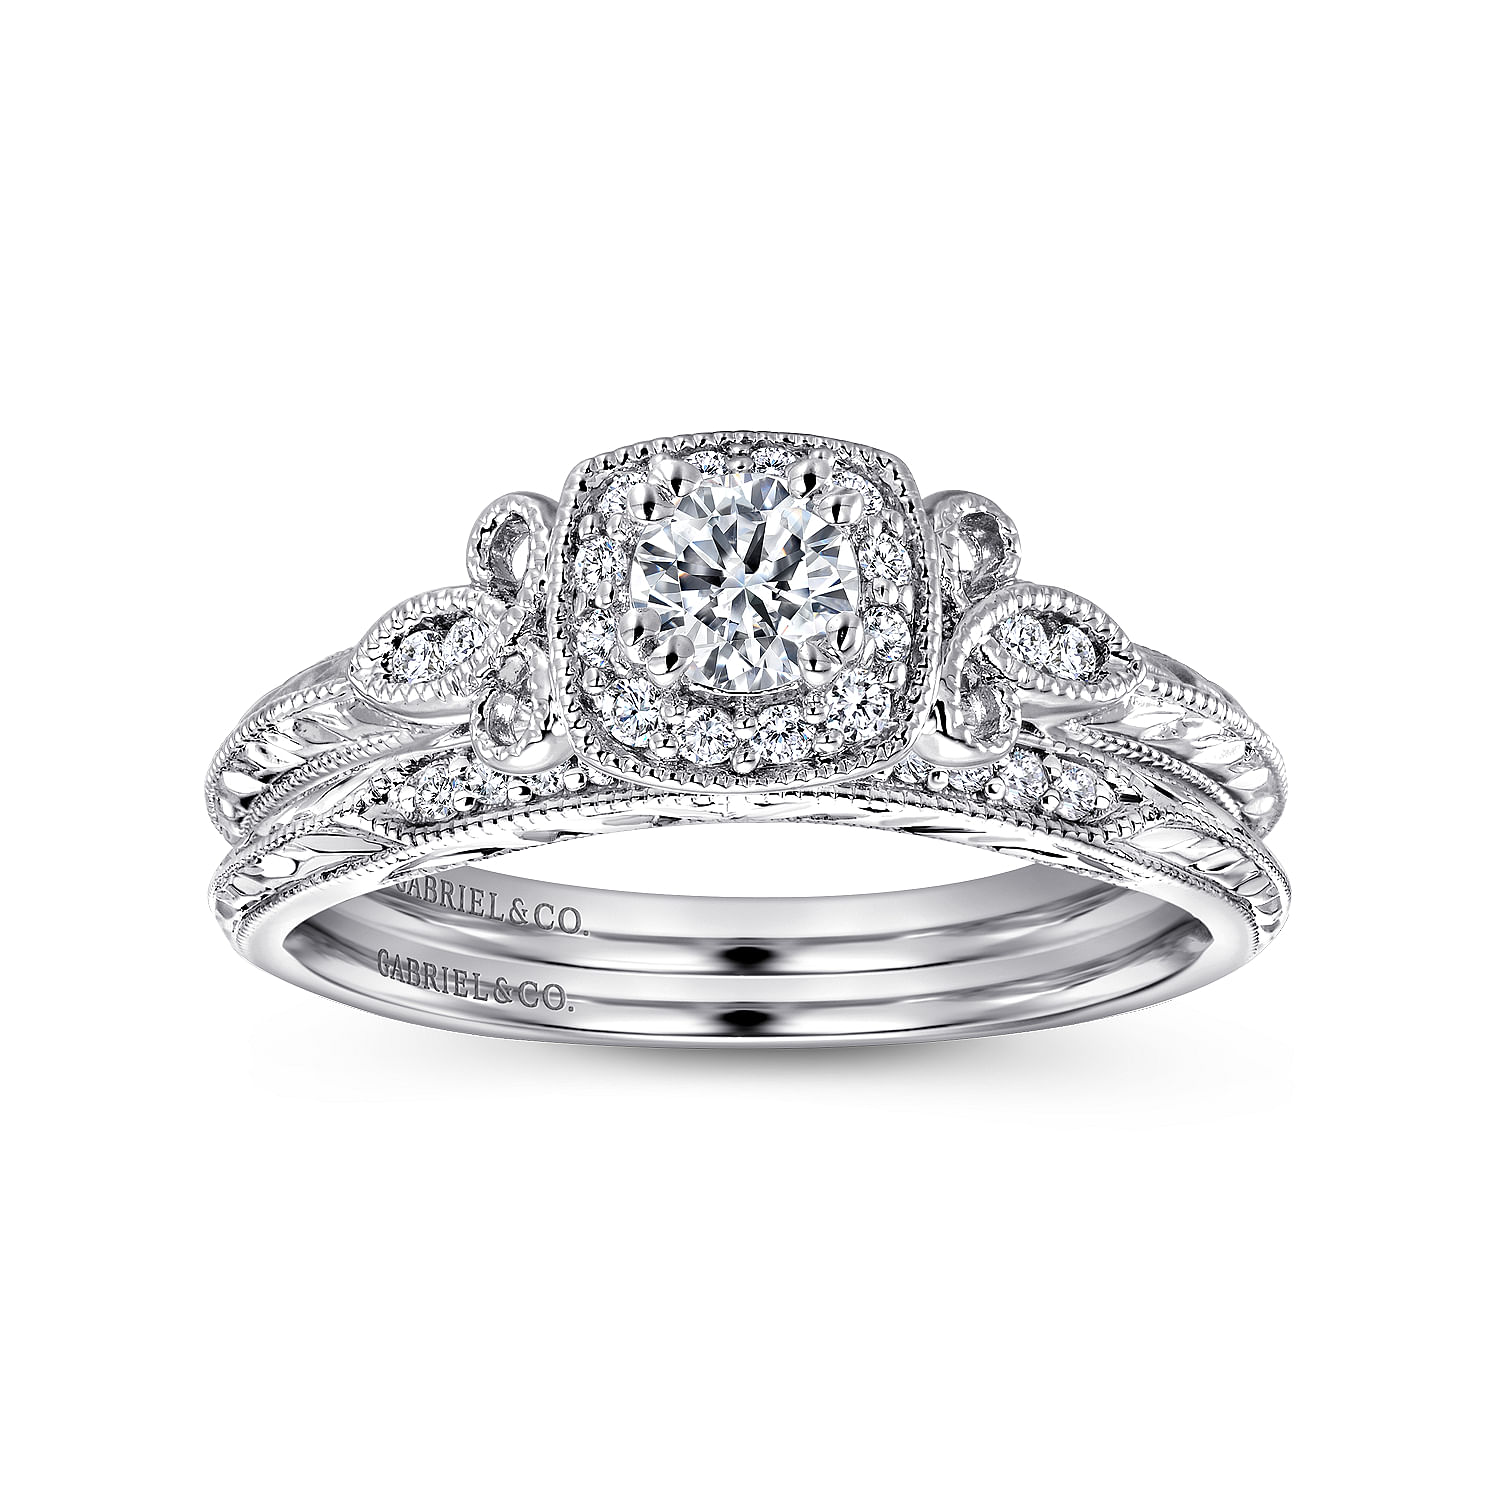 Vintage Inspired 14K White Gold Round Halo Complete Diamond Channel Set Engagement Ring